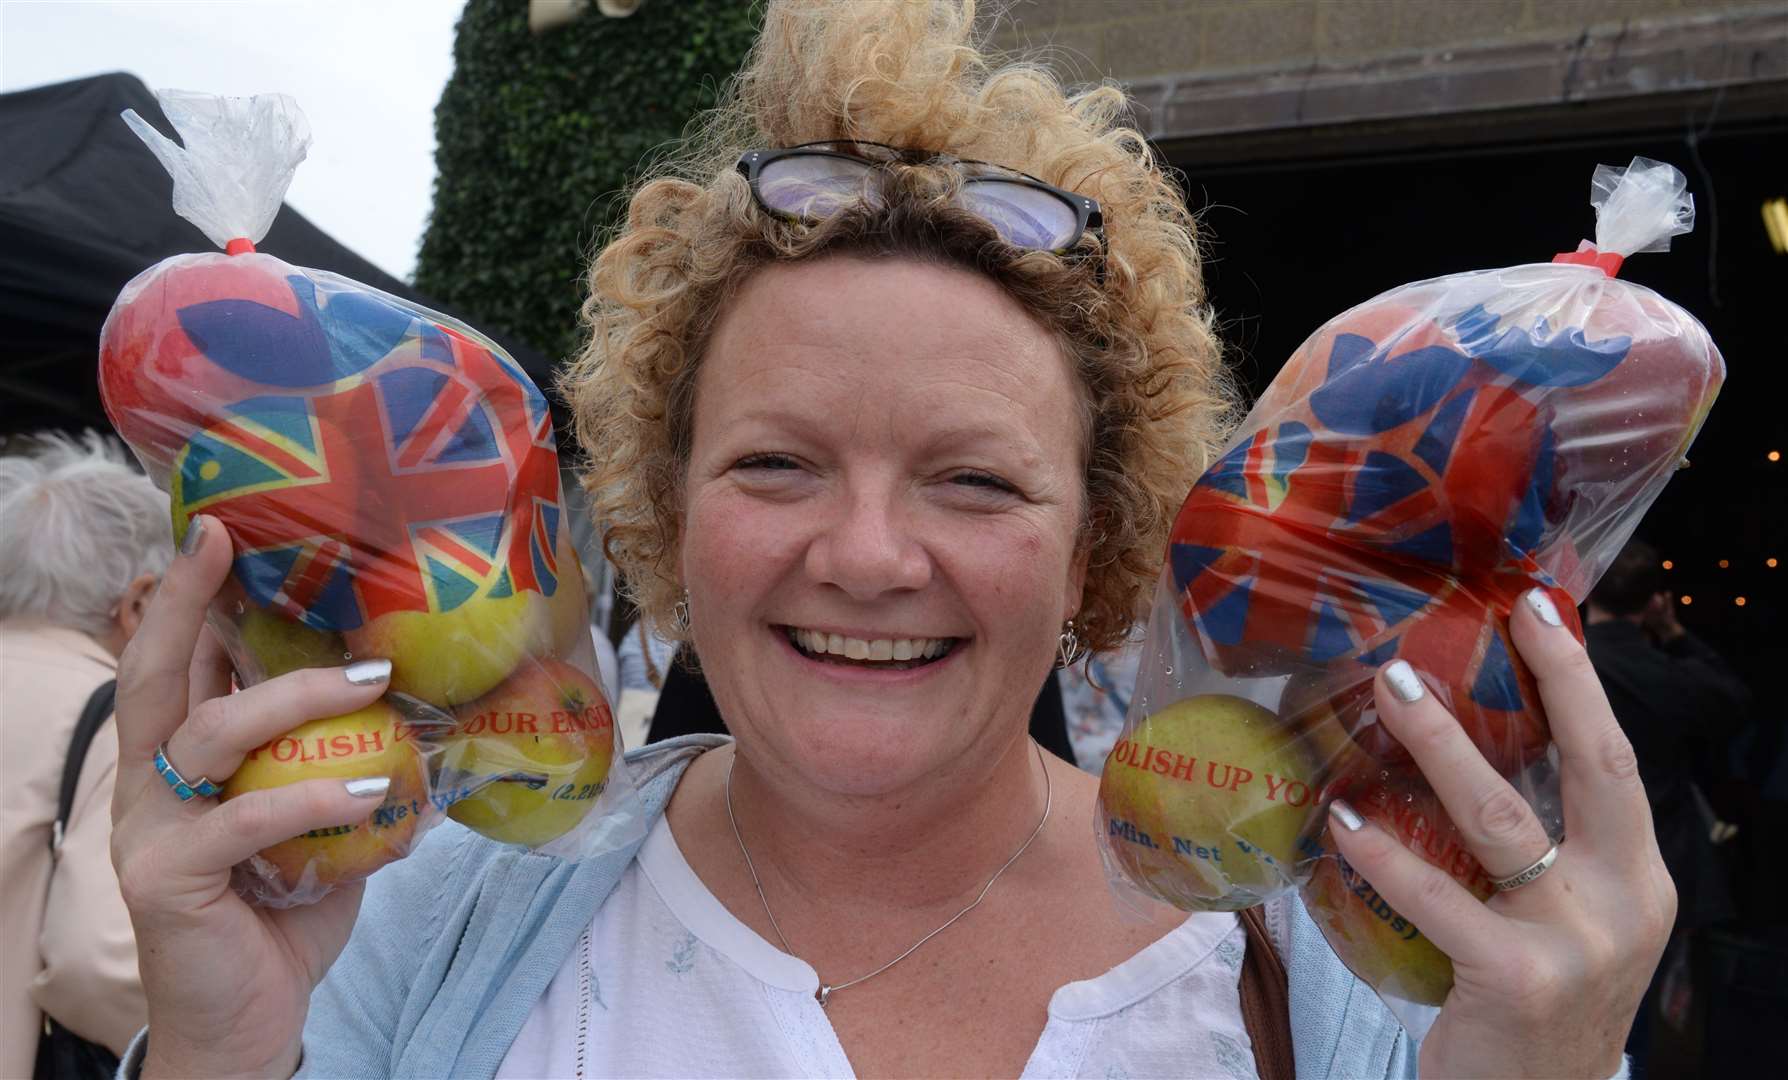 Julie Harmieson with some apples at last year's festival Picture: Chris Davey